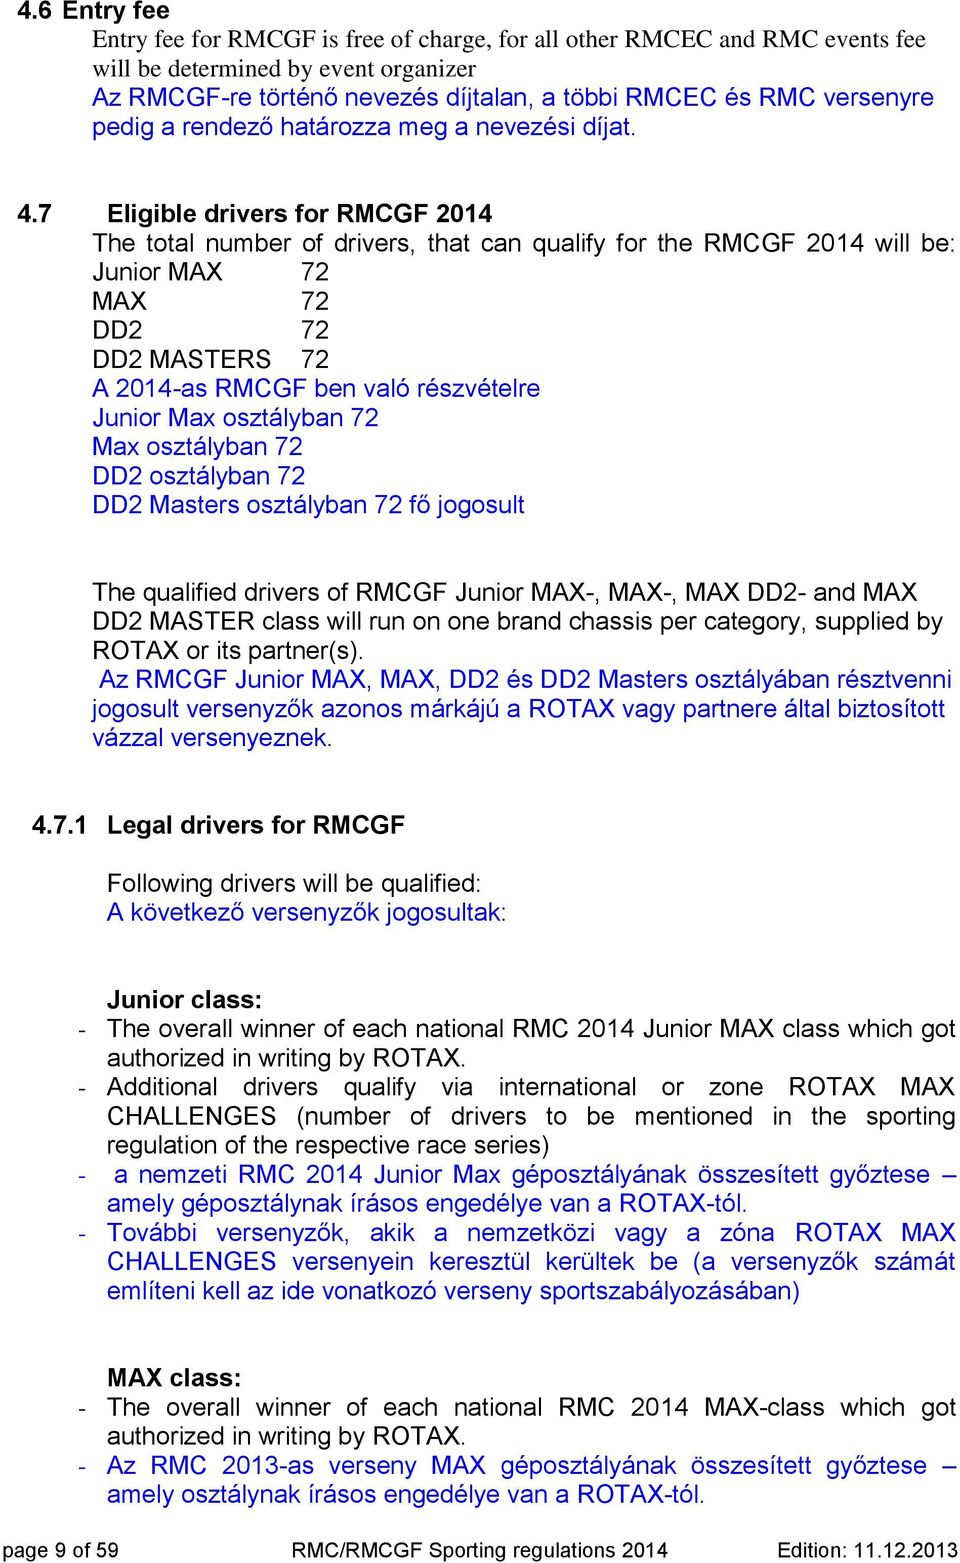 7 Eligible drivers for RMCGF 2014 The total number of drivers, that can qualify for the RMCGF 2014 will be: Junior MAX 72 MAX 72 DD2 72 DD2 MASTERS 72 A 2014-as RMCGF ben való részvételre Junior Max